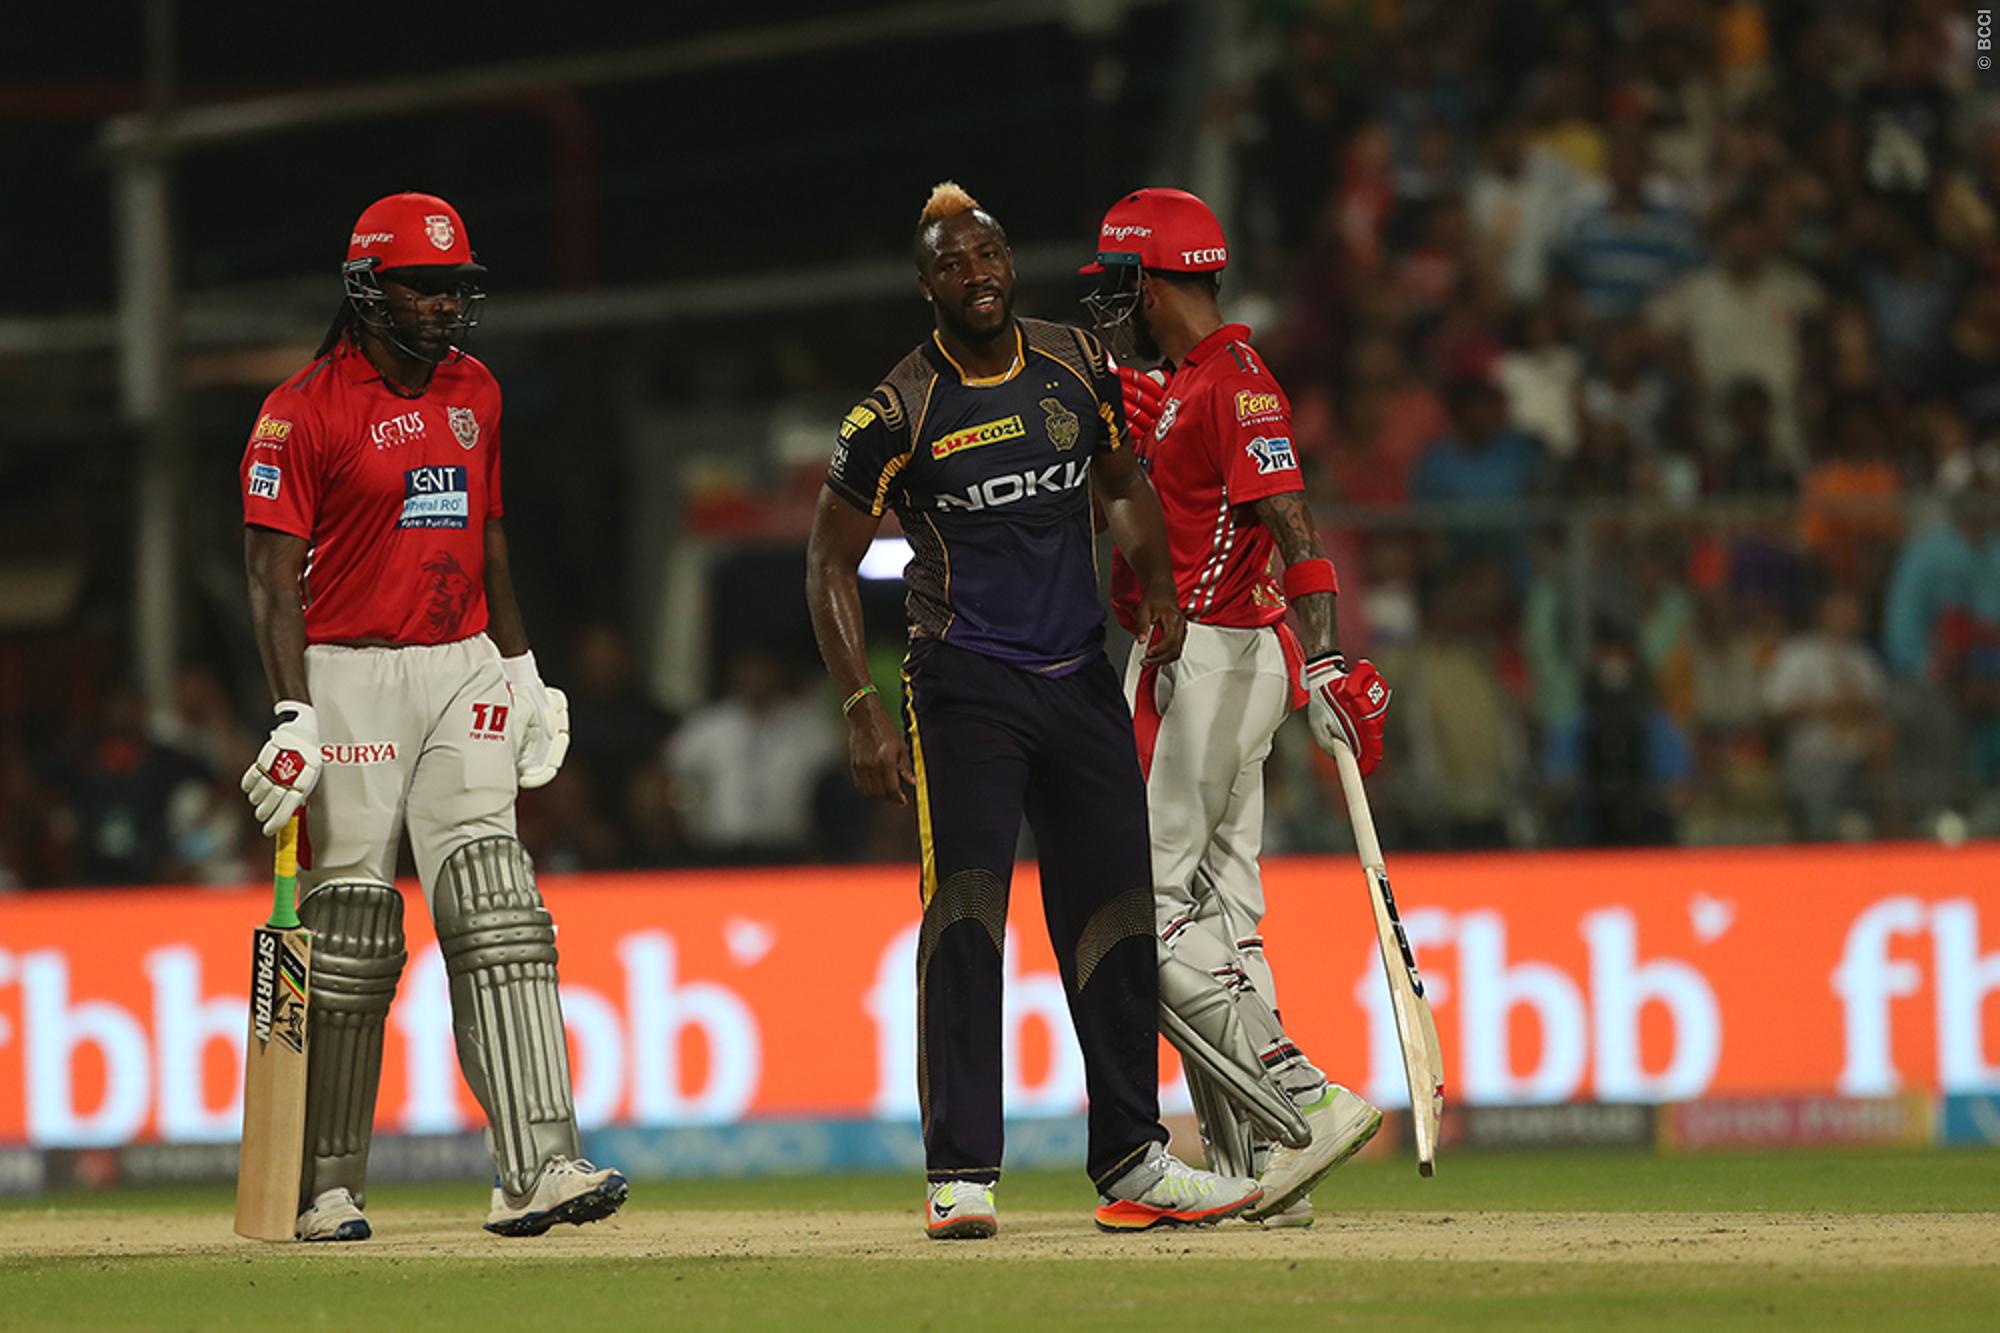 Rahul and Gayle helped punjab to beat kolkata by 9 wickets in IPL 2018